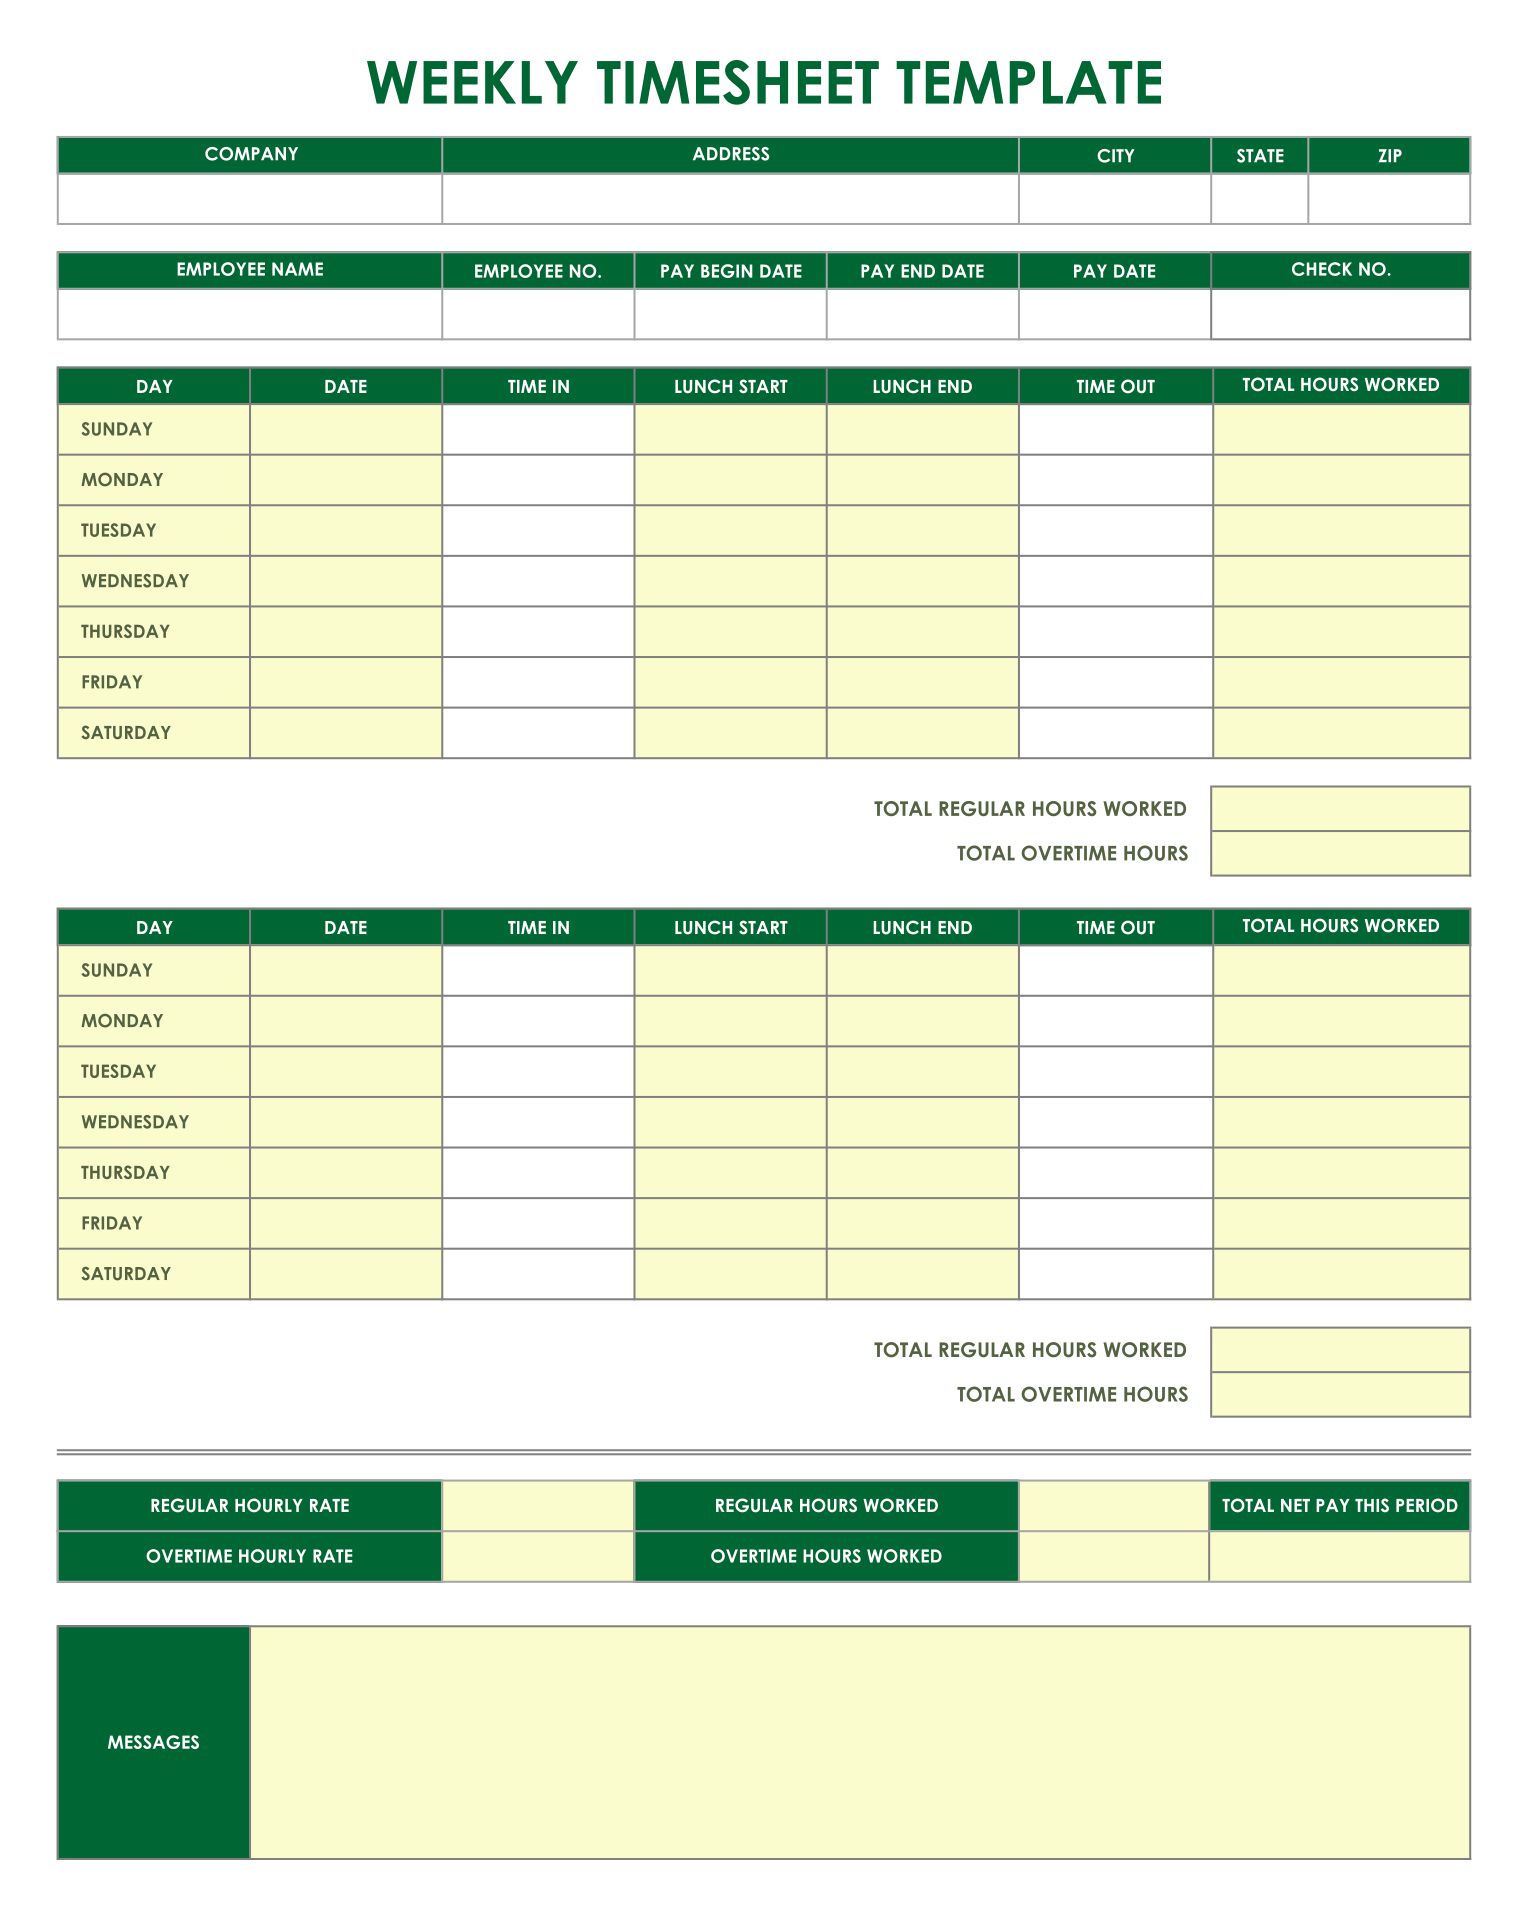 Daily Timesheet Template Free Printable from www.printablee.com